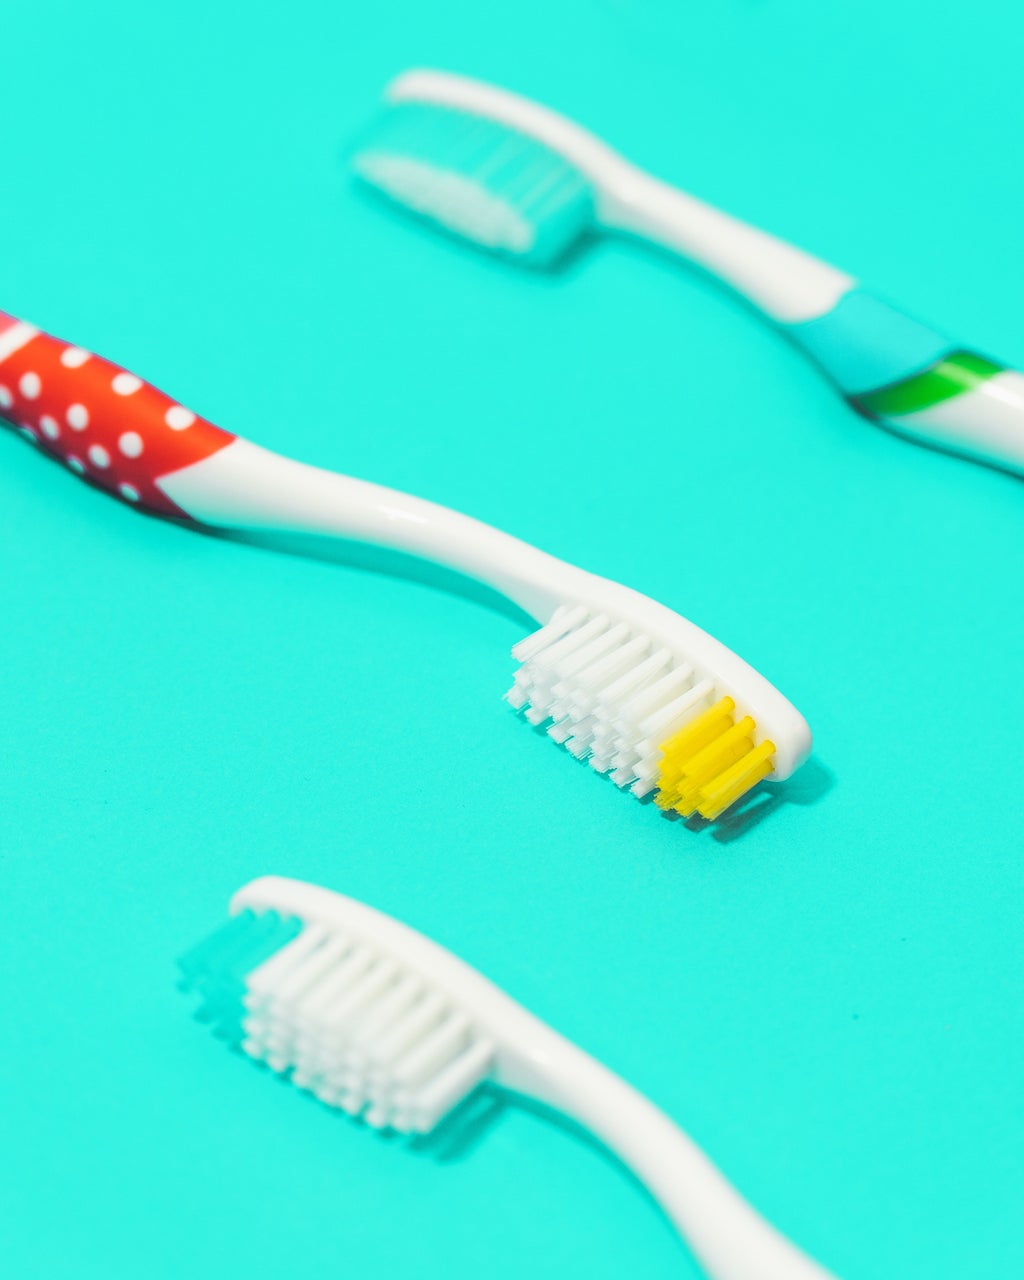 3 toothbrushes with a teal / turquoise background